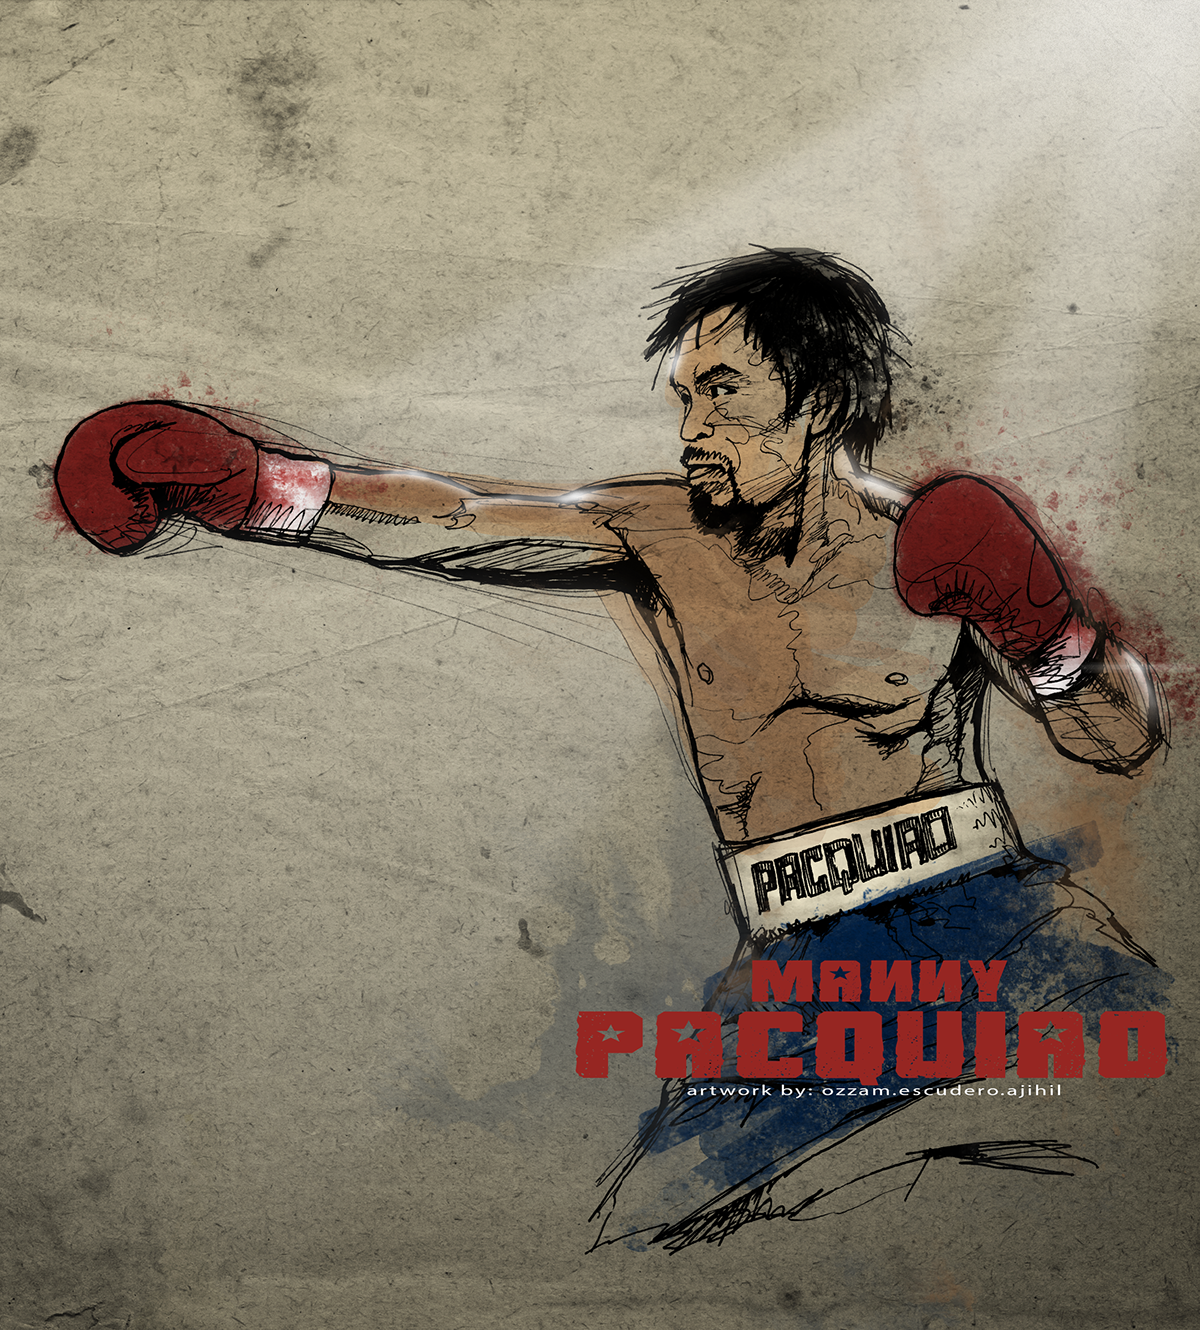 pacquiao Mayweather pacquiao vs mayweather Boxing Pound for pound TMT Pacman fight of the Century MGM Grand poster sketch